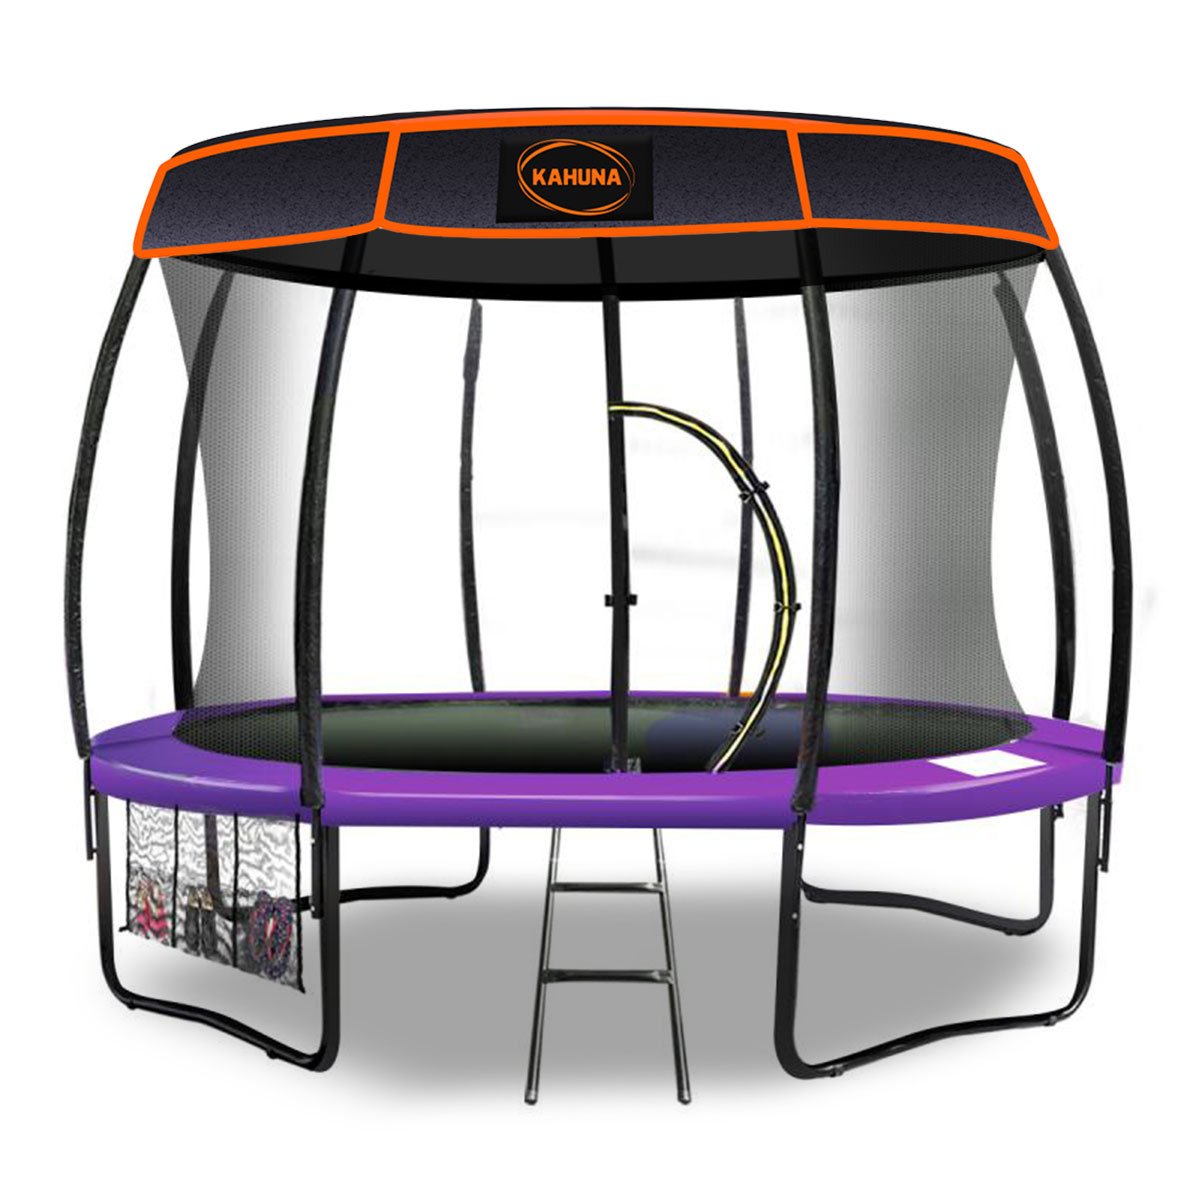 trampolines Trampoline 12 ft with  Roof-Purple